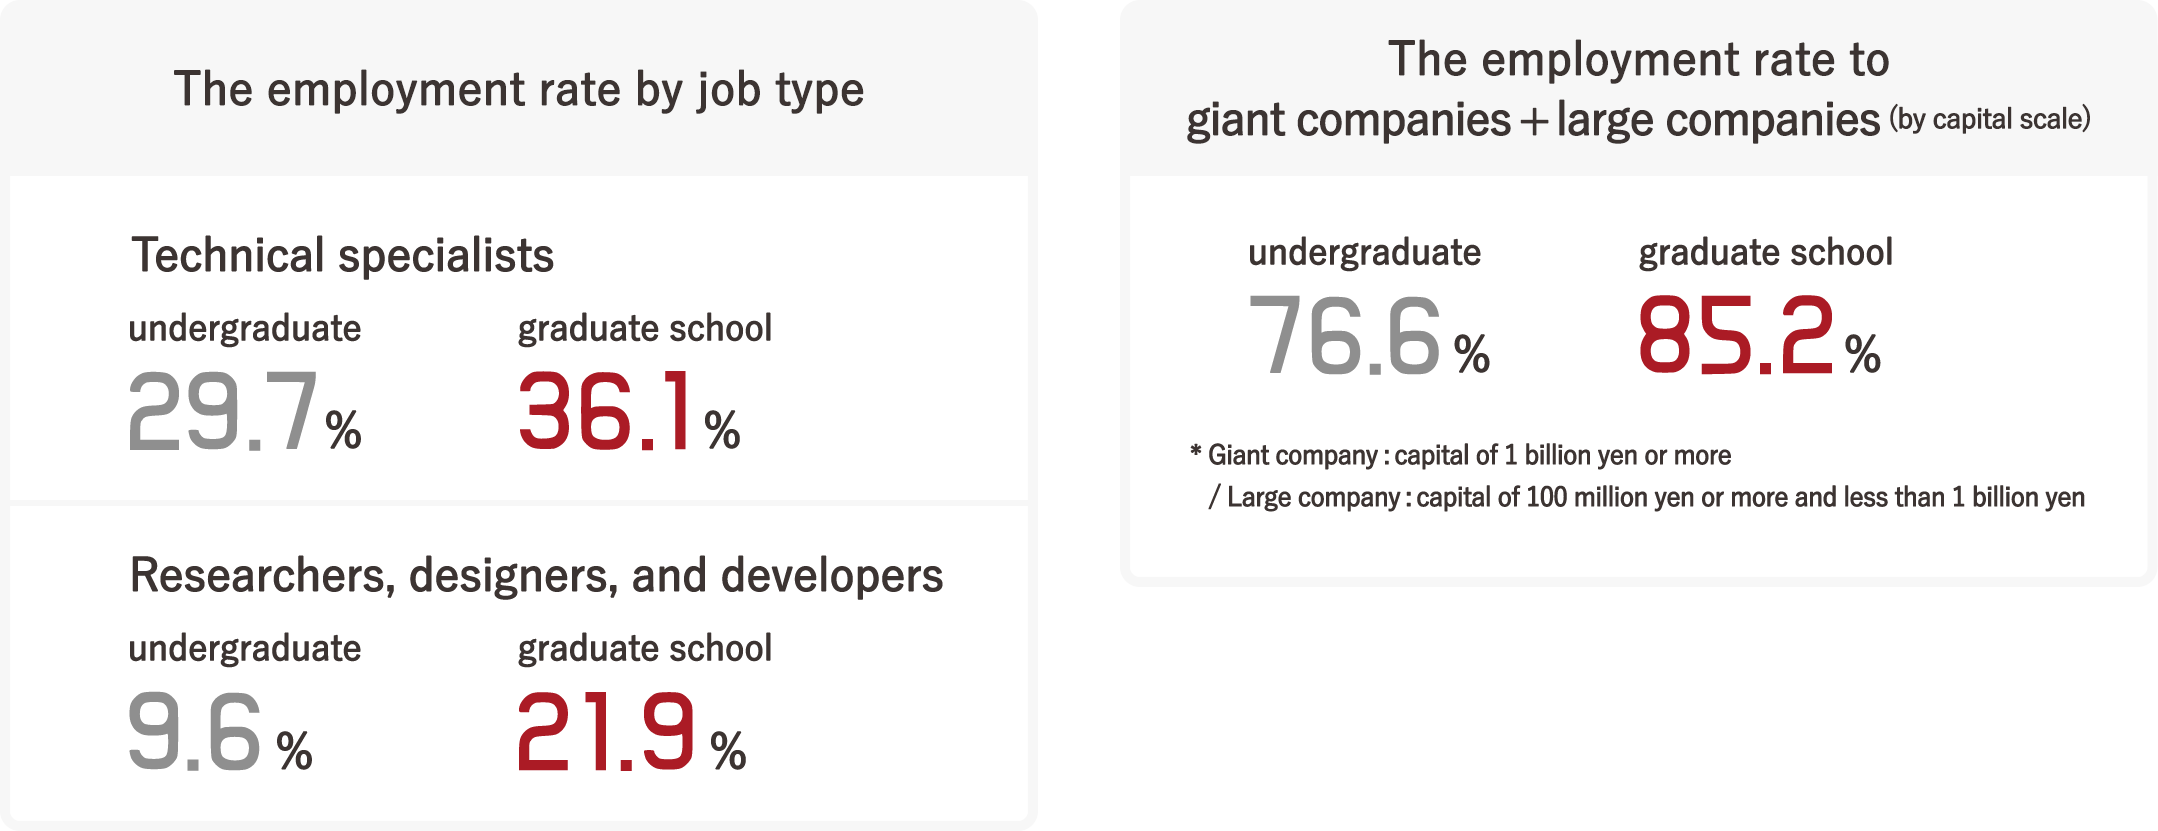 Employment decision rate for giant companies + large companies (by capital scale)